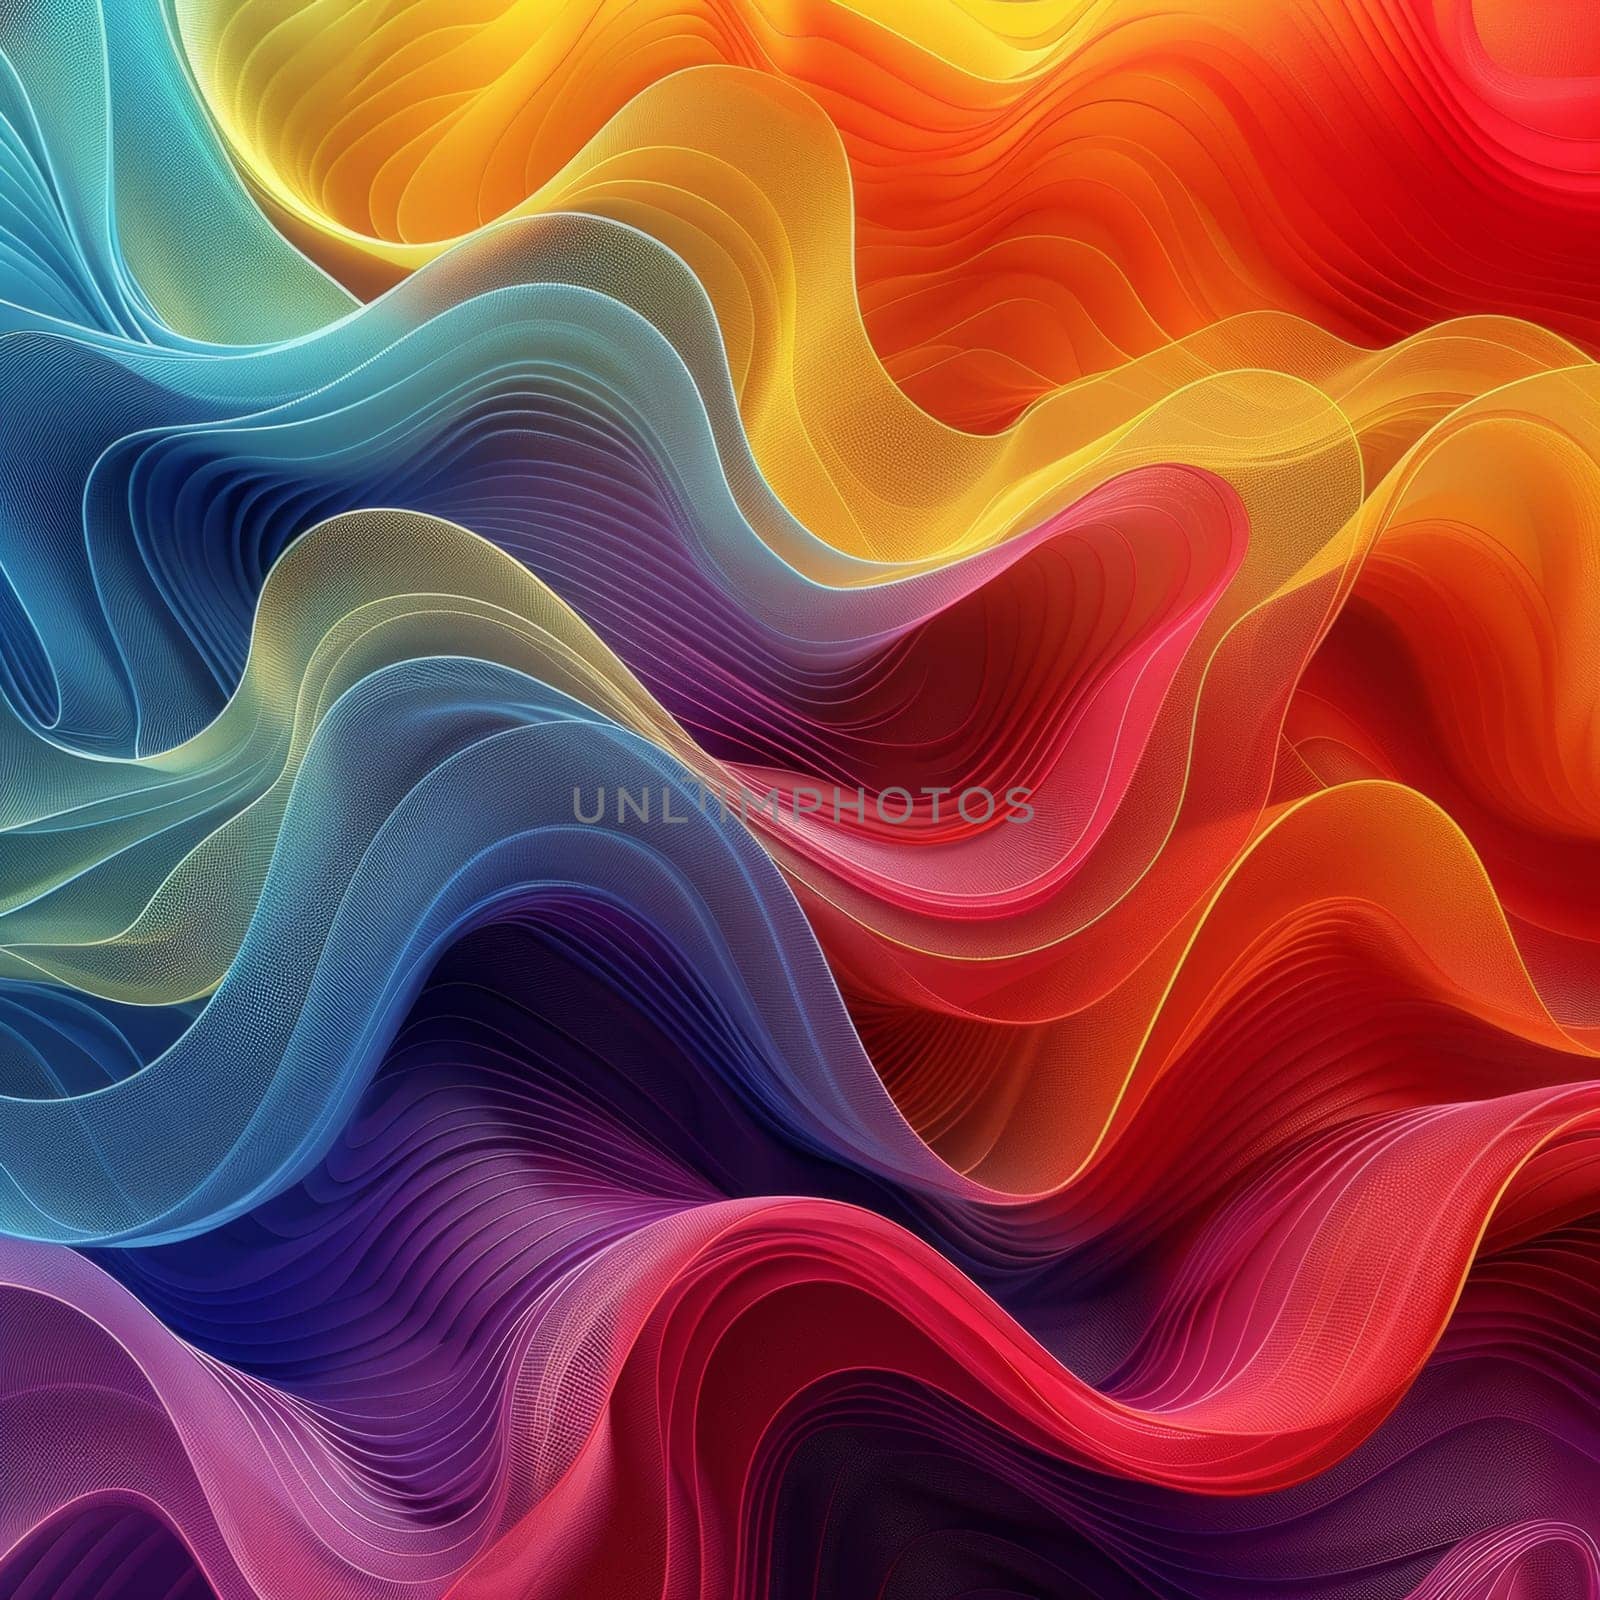 A close up of a colorful wavy pattern on fabric